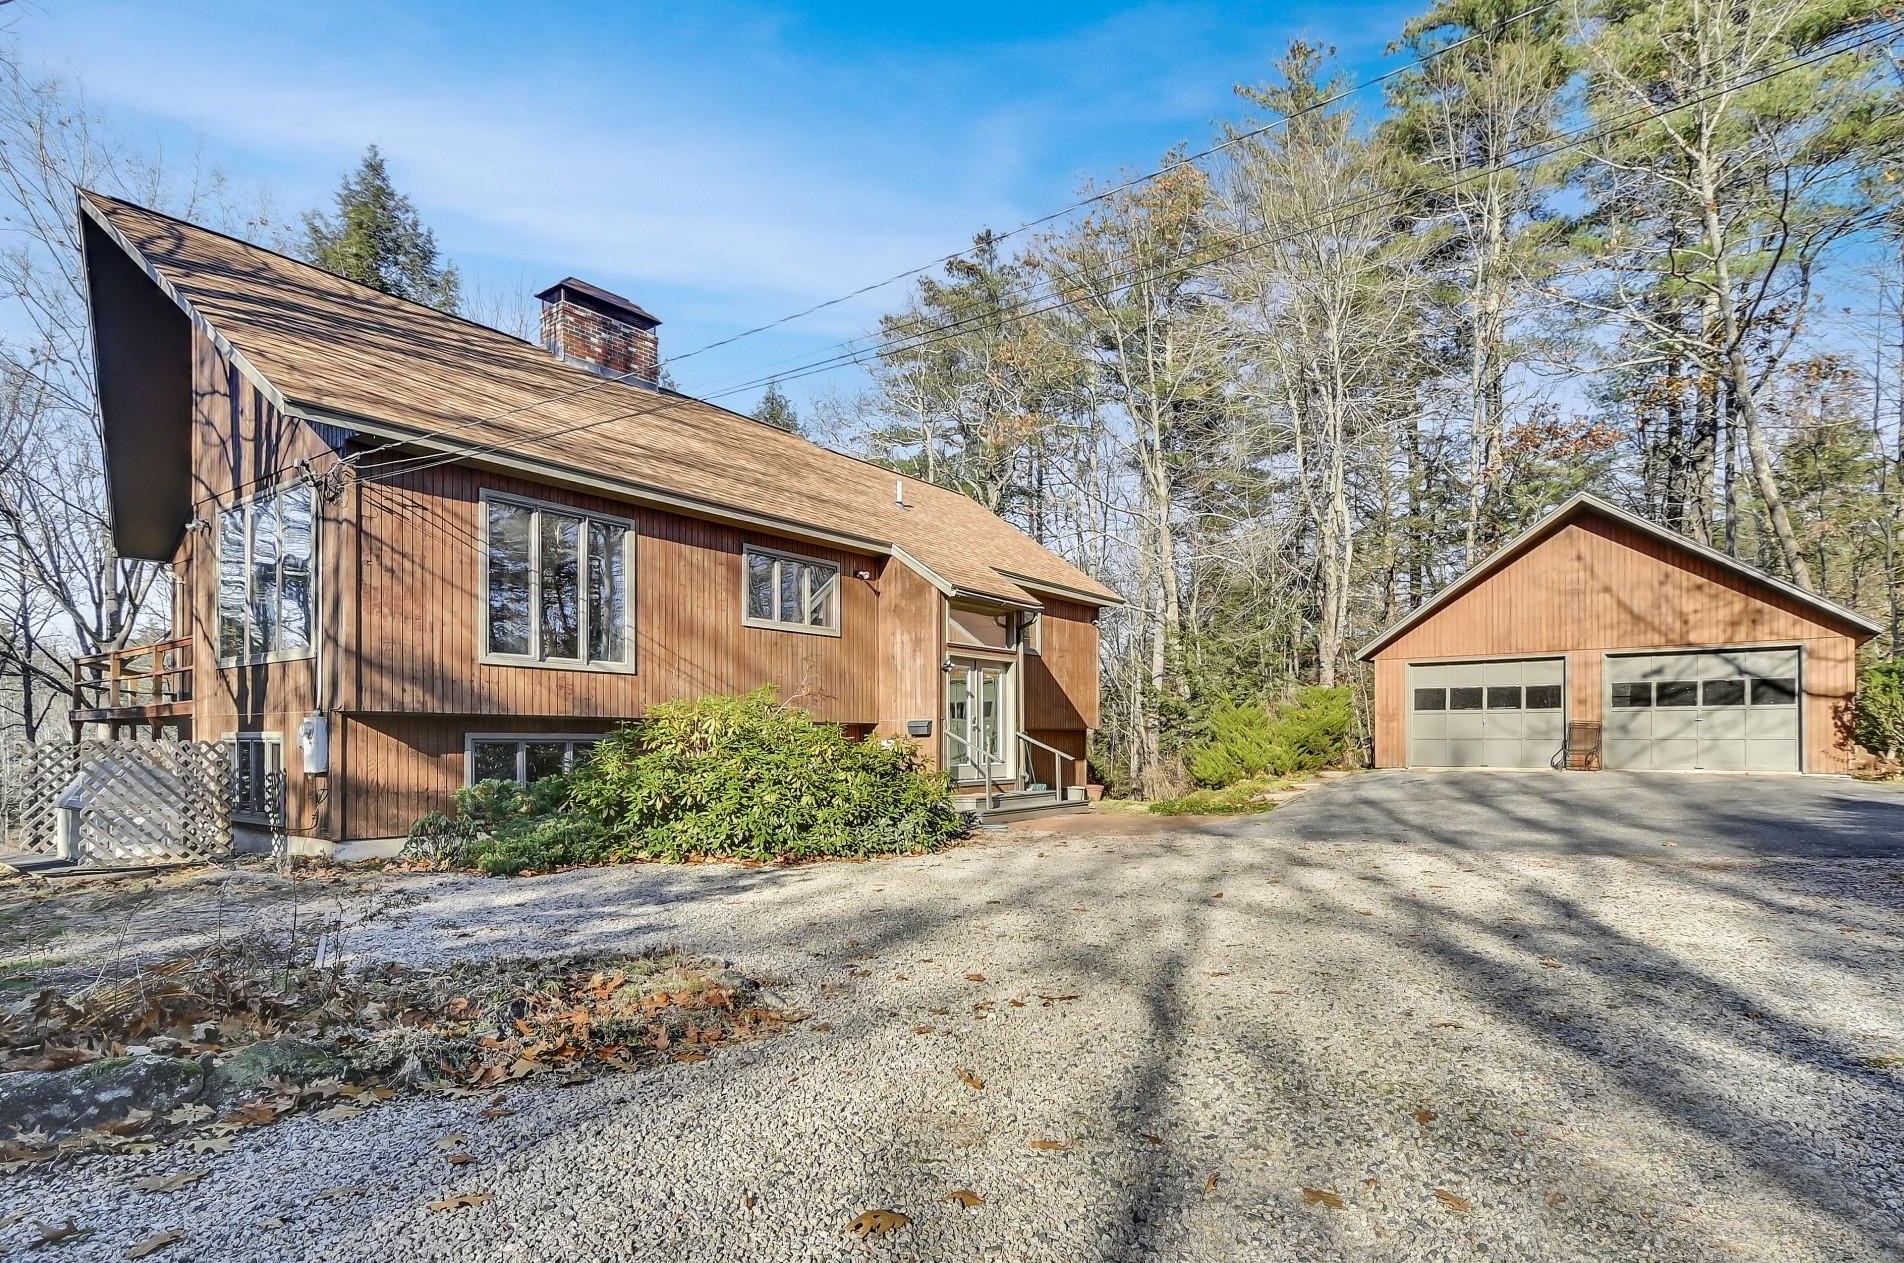 278 Newmarket Rd, Lee, NH 03824